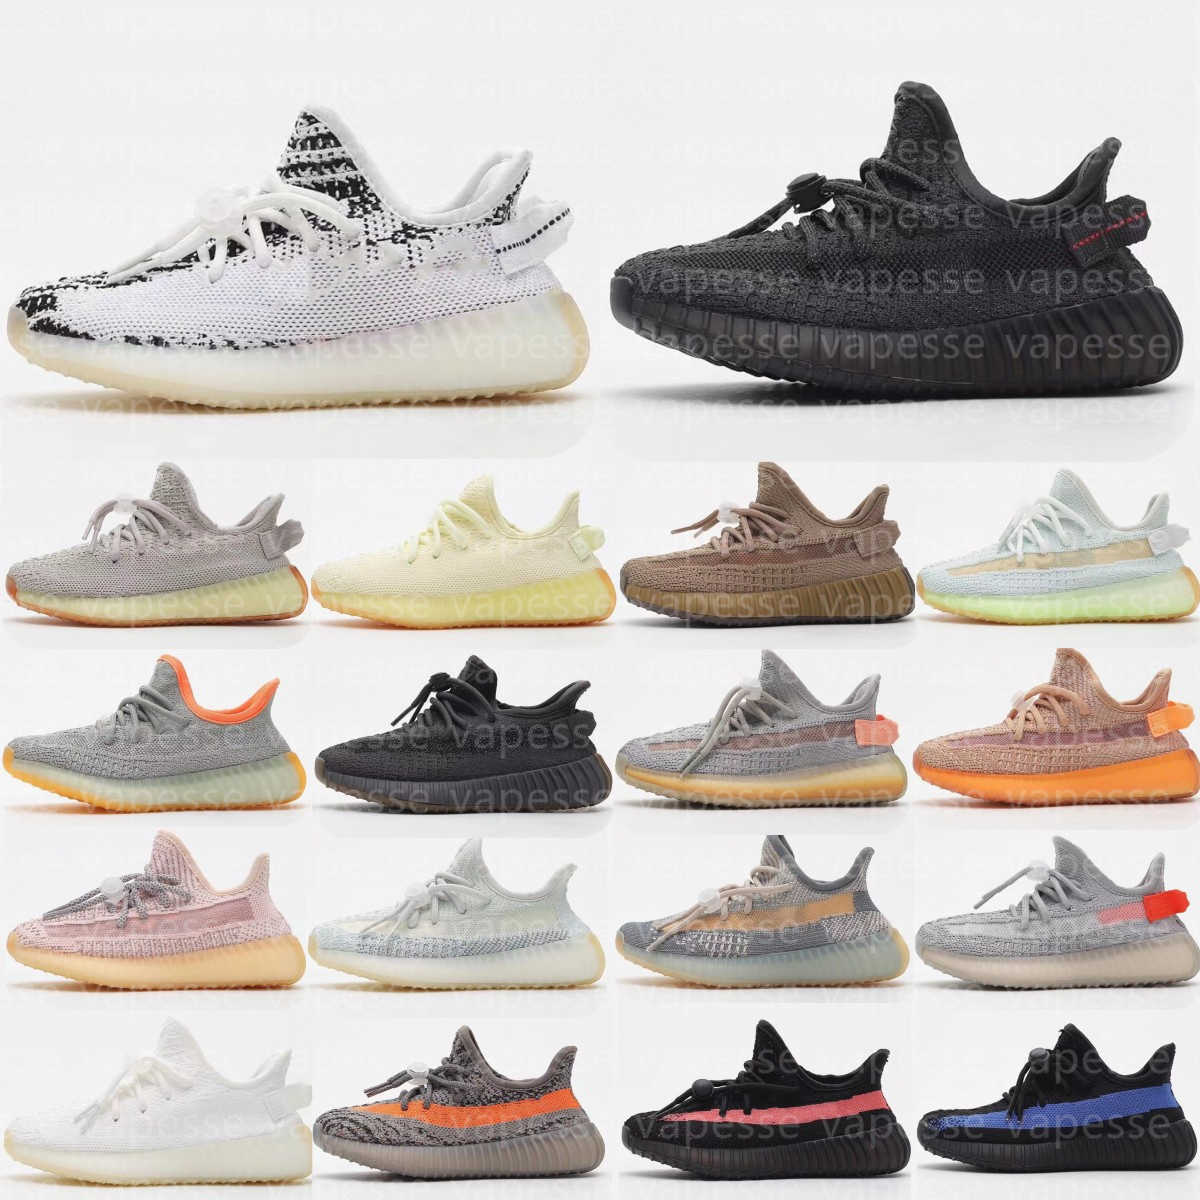 

2023 Kids 350 v2 Running Shoes Children Basketball Trainers Wolf Grey Toddler Sports yezzy Outdoor Sneakers Kanye yeezzys For Boy And Girl Pour Enfant yeezies 35, As